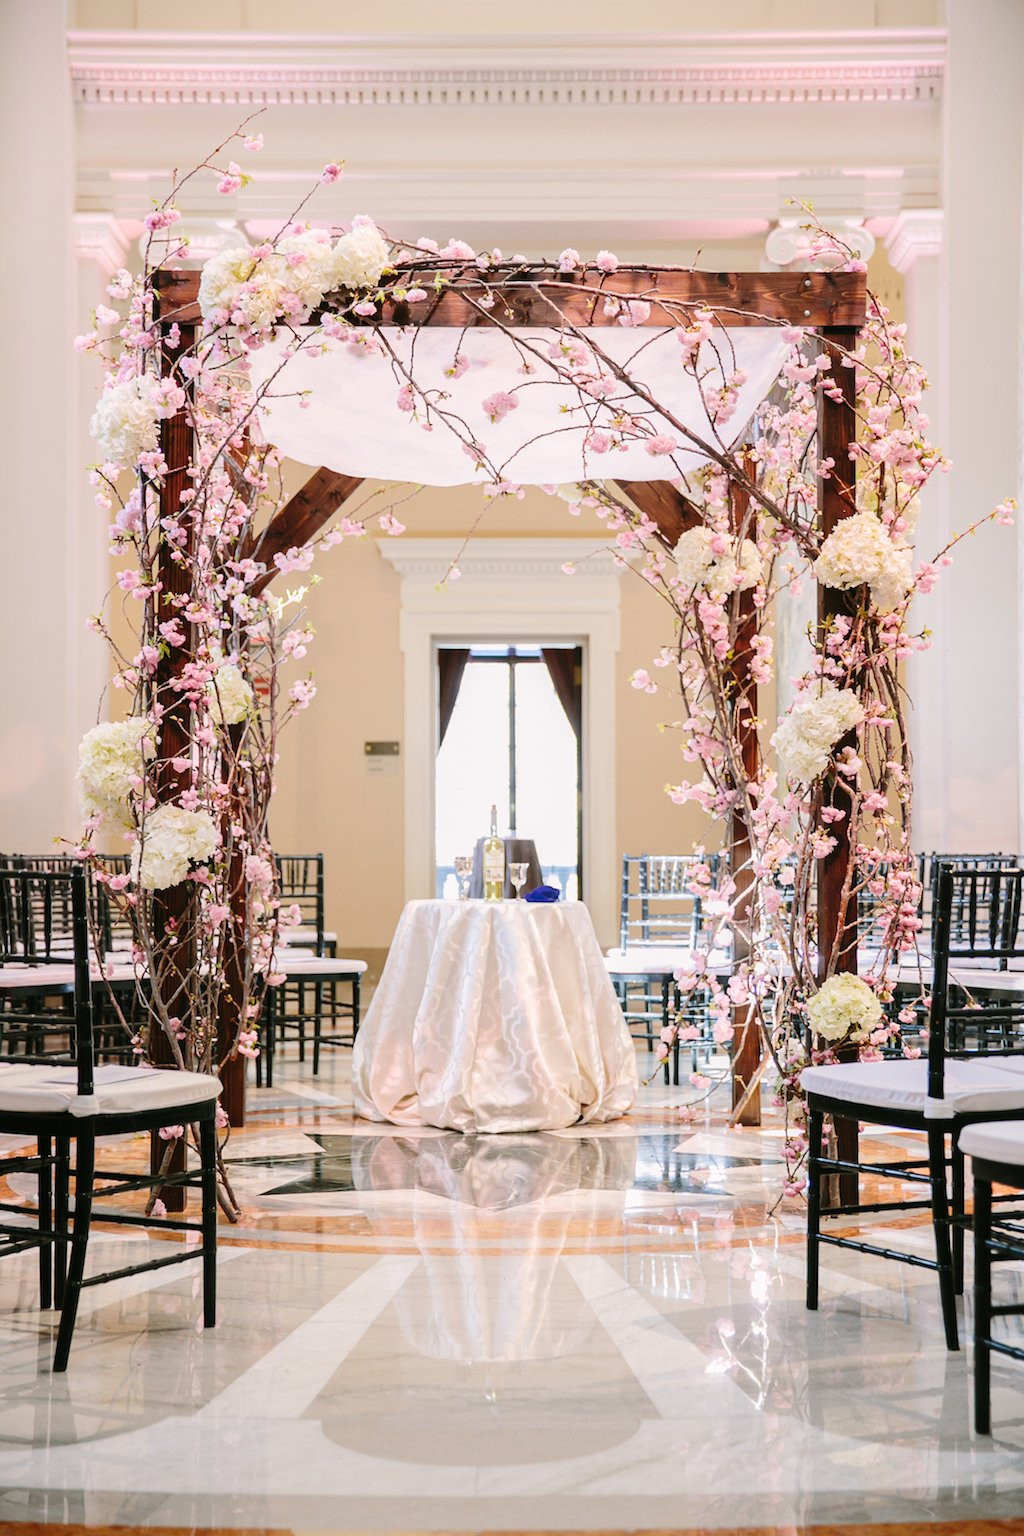 Cherry Blossom Wedding Theme
 18 Ideas to Steal for Your Cherry Blossom Themed Wedding